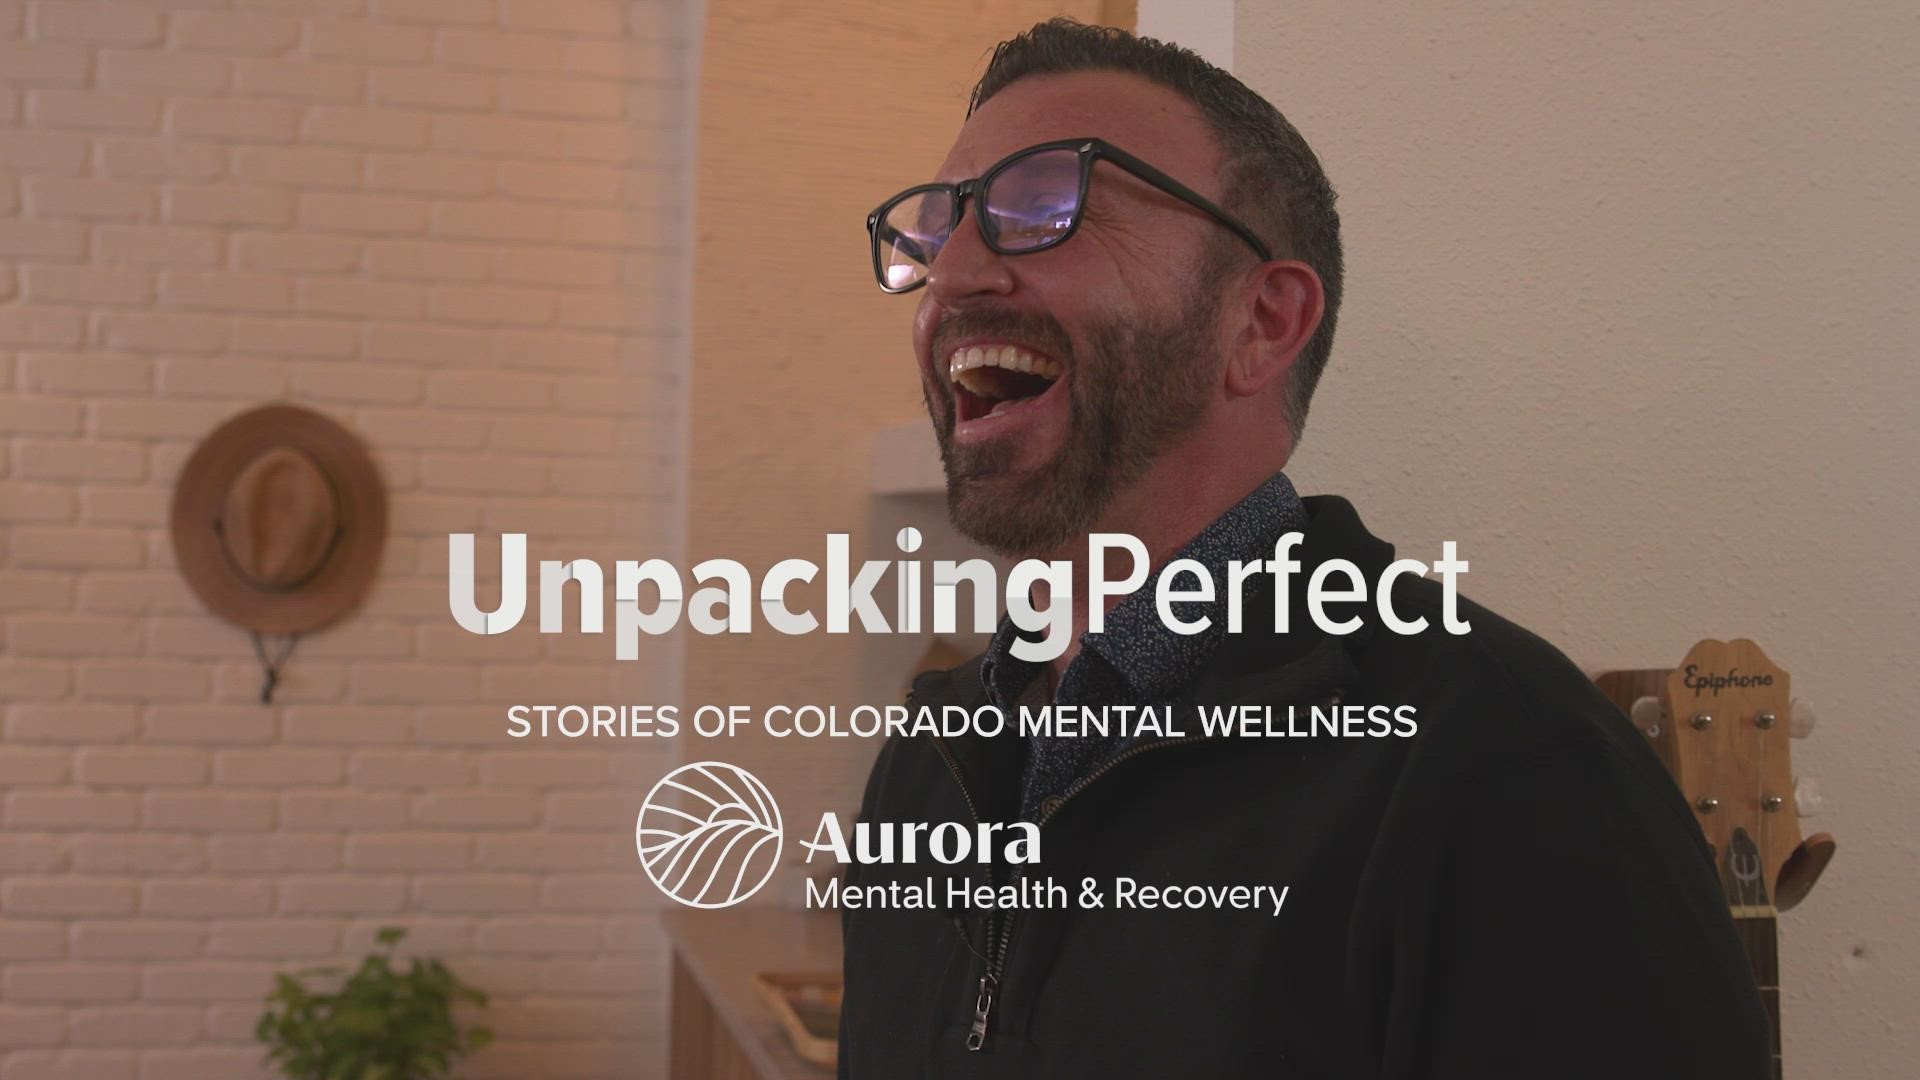 Jamie recently sat down with 9NEWS and Unpacking Perfect to share his story of mental wellness, and how he has pushed aside the ideals of perfection.